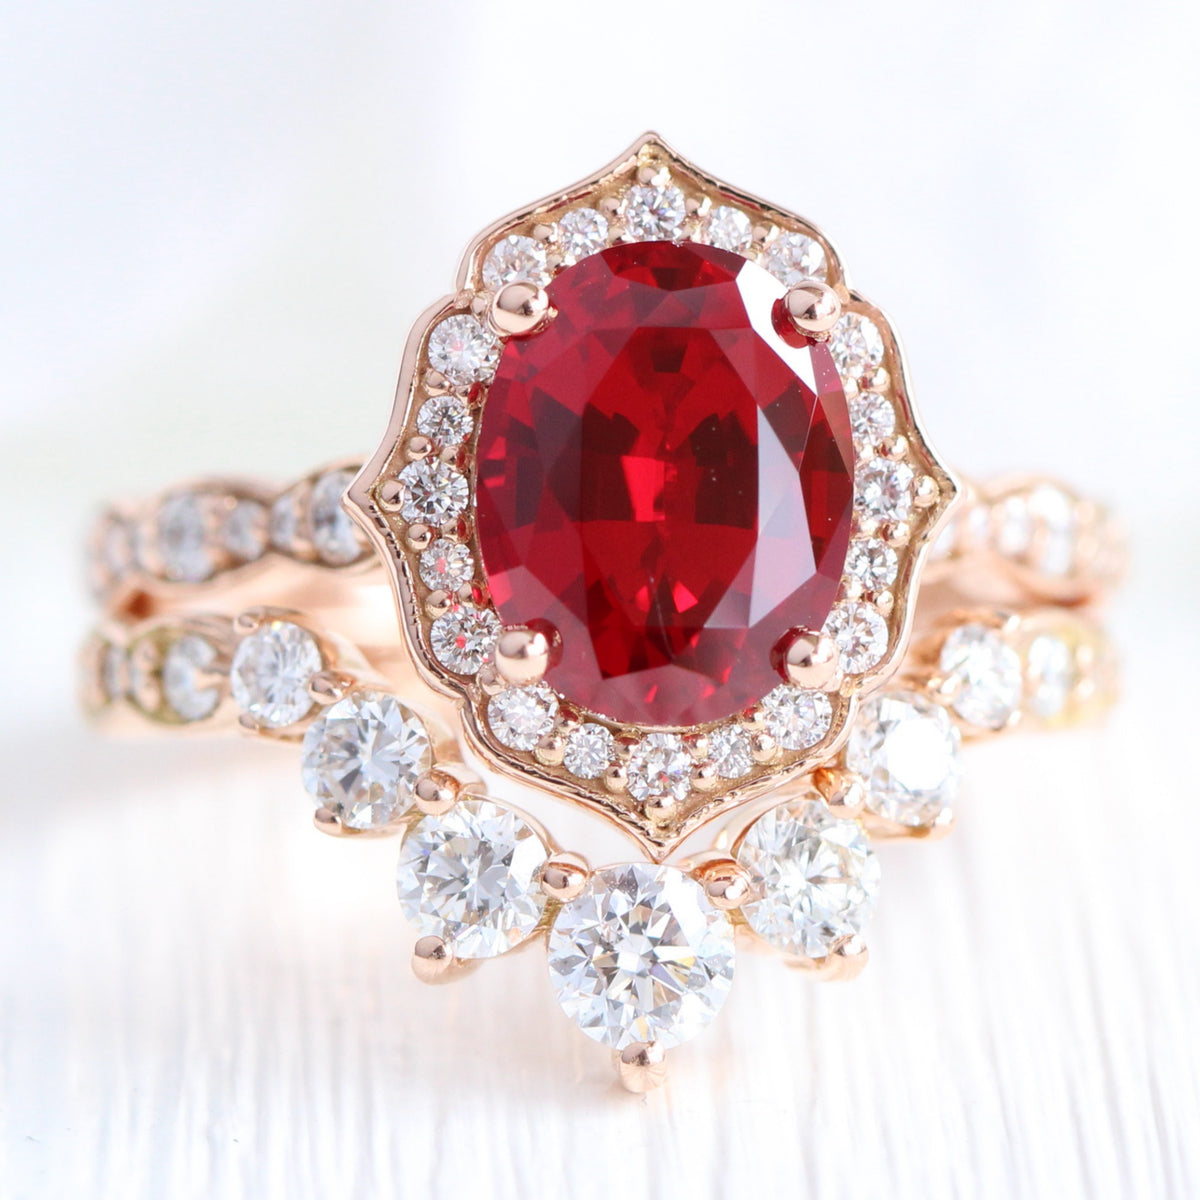 Vintage halo diamond large ruby ring stack rose gold deep curved wedding band la more design jewelry-1.J